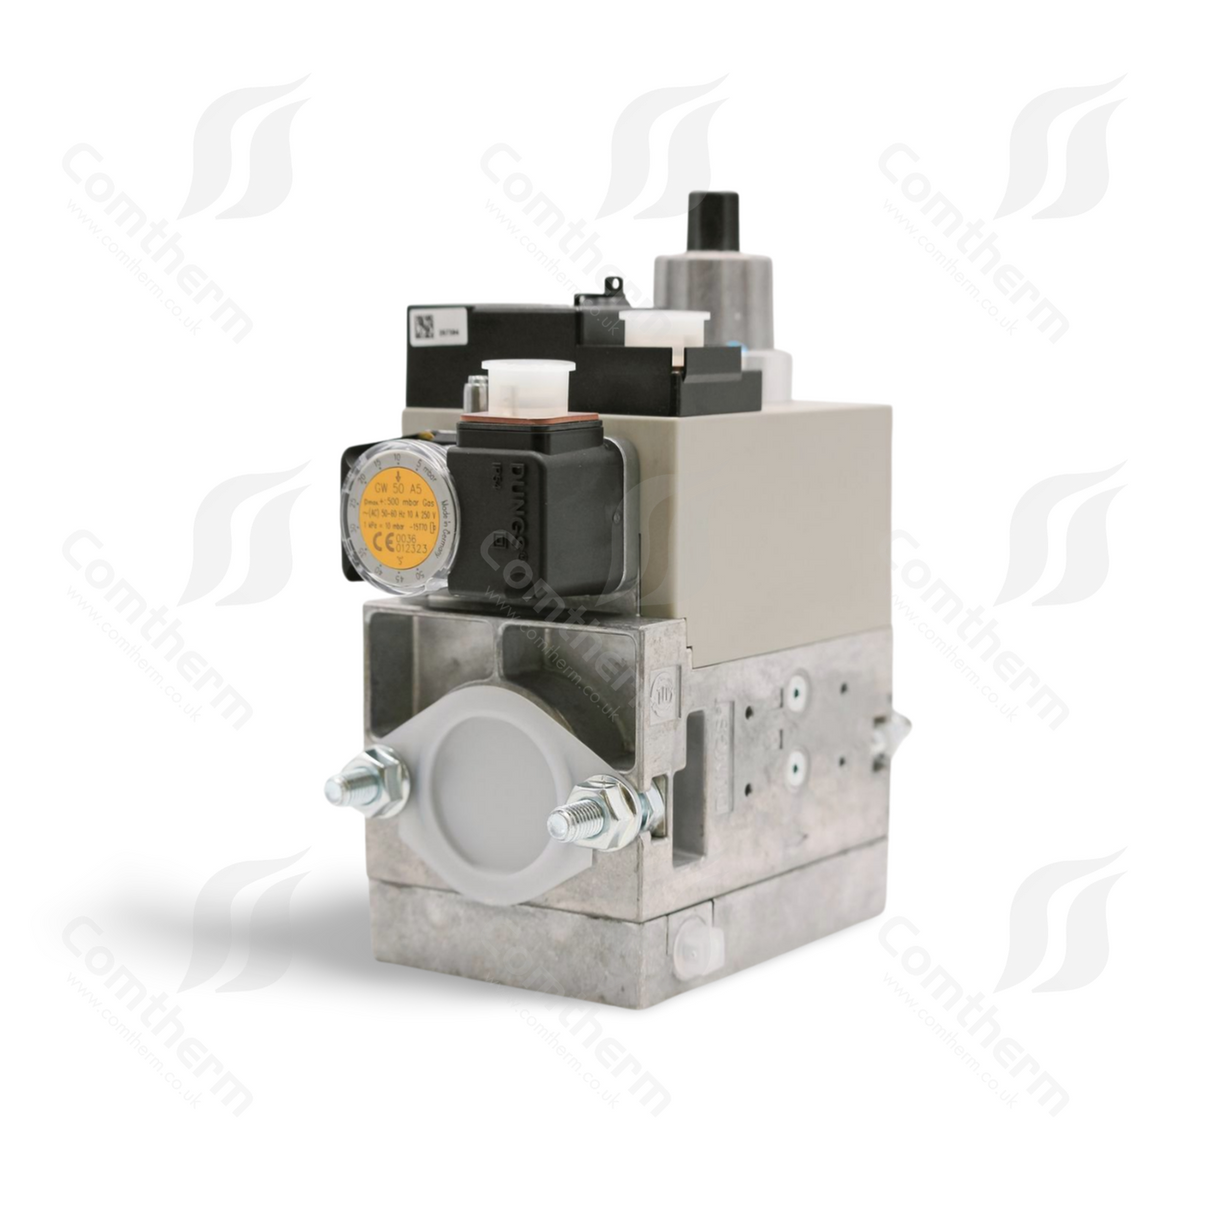 Dungs MB-DLE 410 B01 S20 + GW50A5 Multiblock-Gasventil – 230 V 